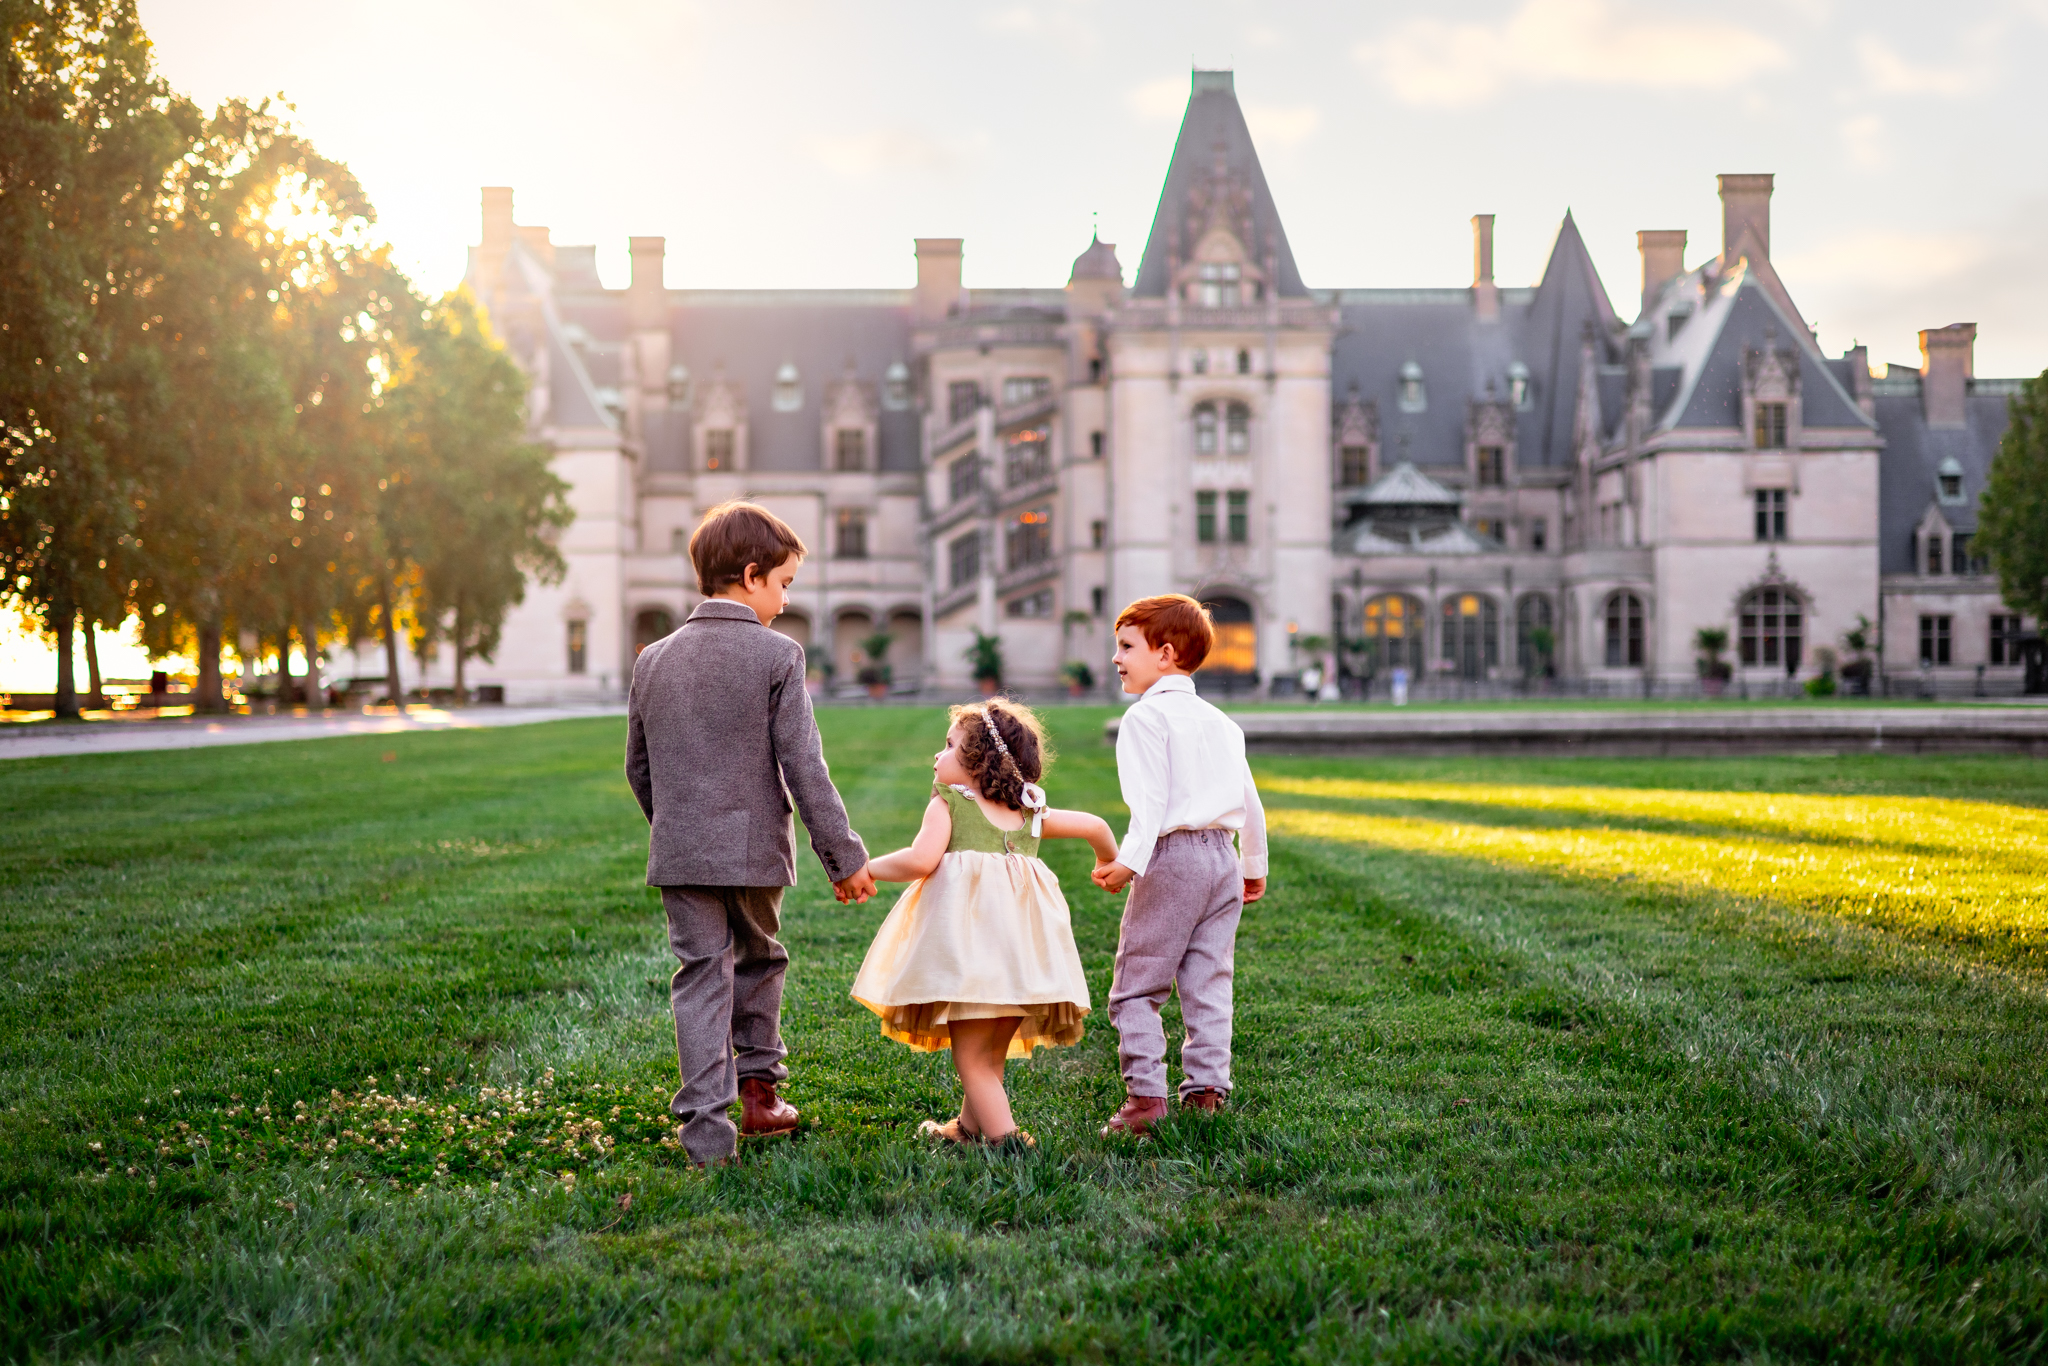 three young children playing and holding hands in front of the Biltmore Estates